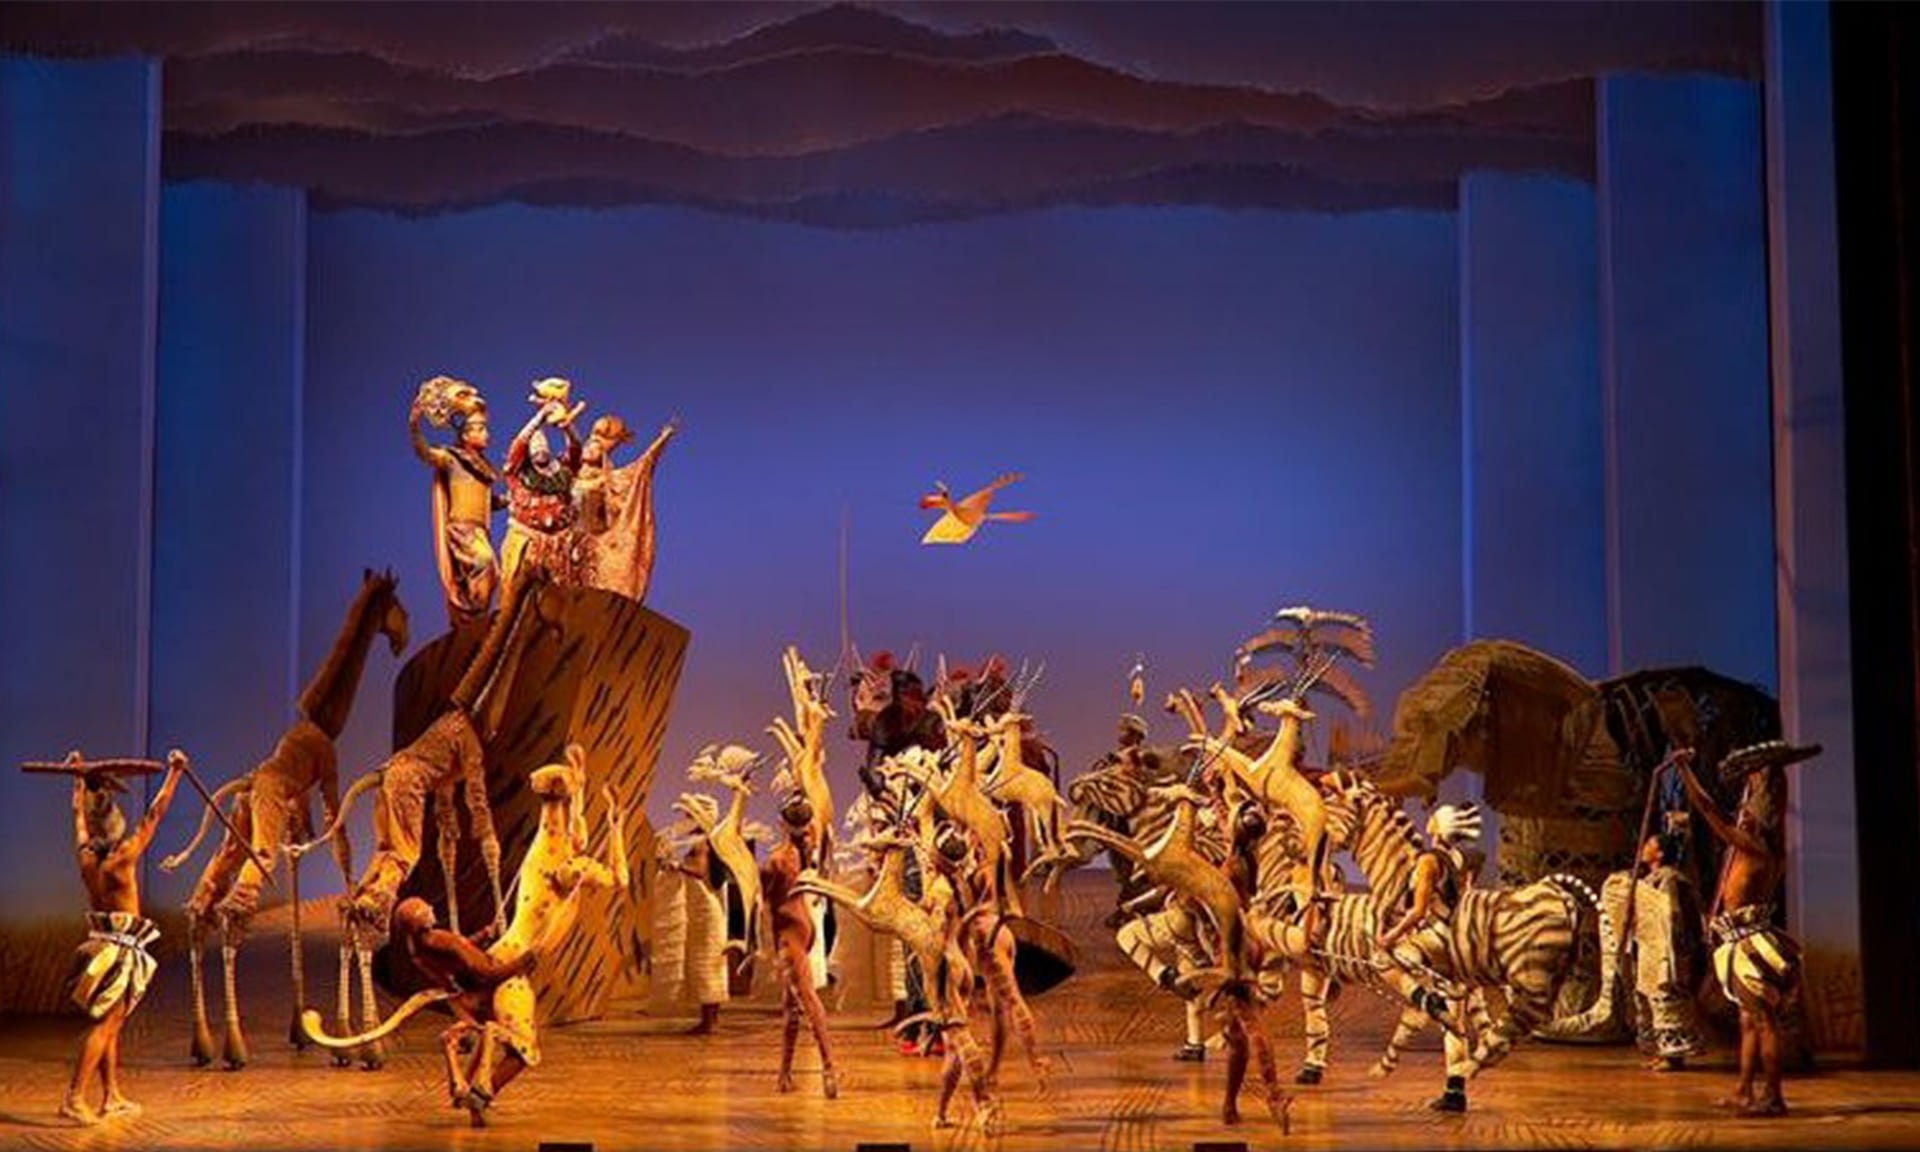 download ticket prices for the lion king on broadway